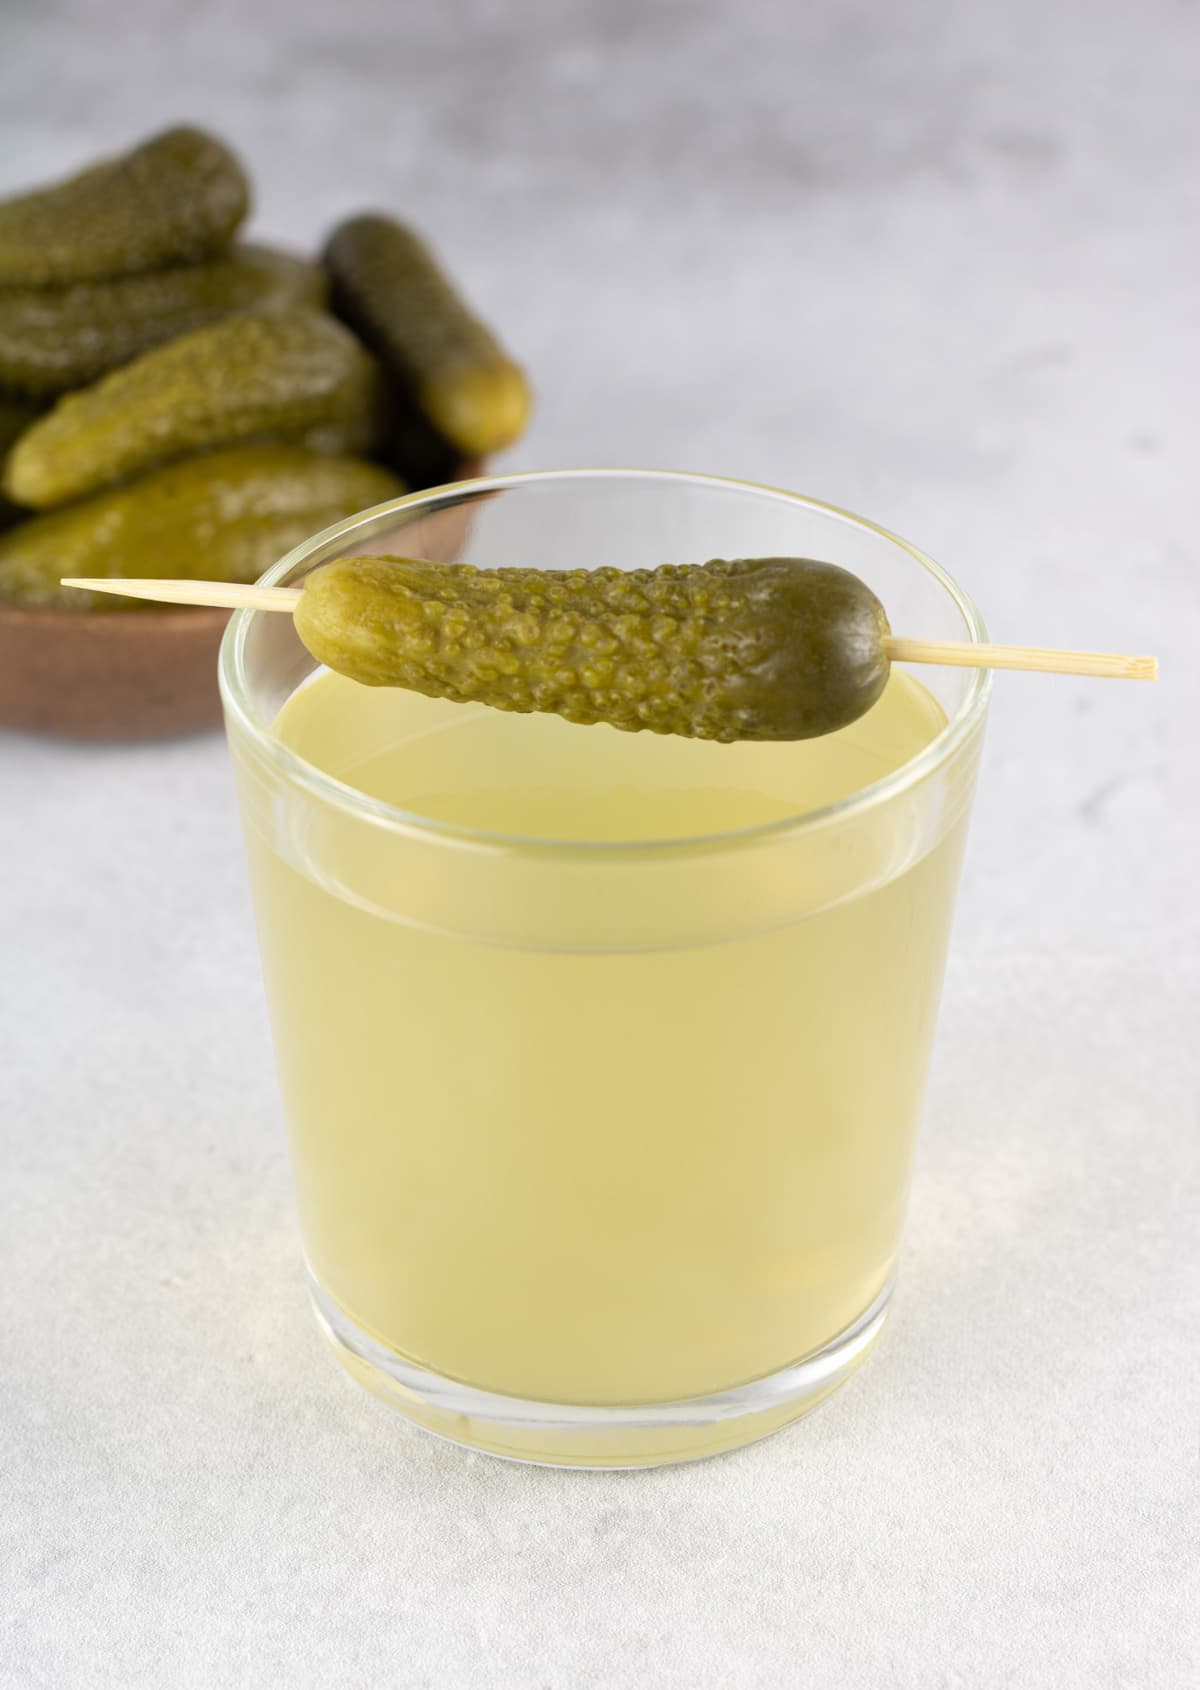 Pickles and pickle brine in a cup